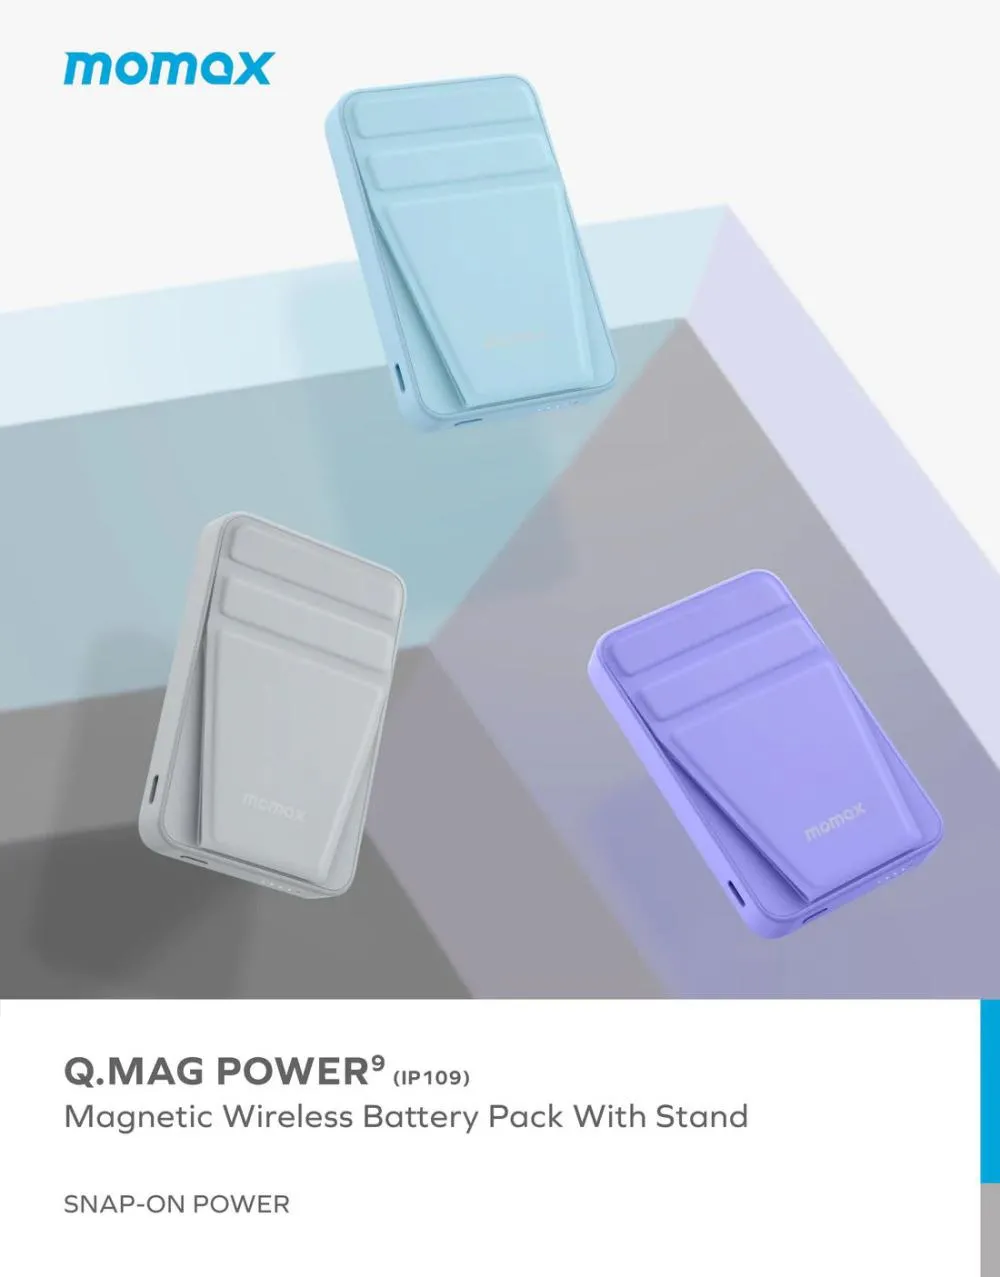 Momax Q Mag Power 9 Pd 20w 5000mah Magnetic Wireless Charging Power Bank With Stand Ip109 (6)